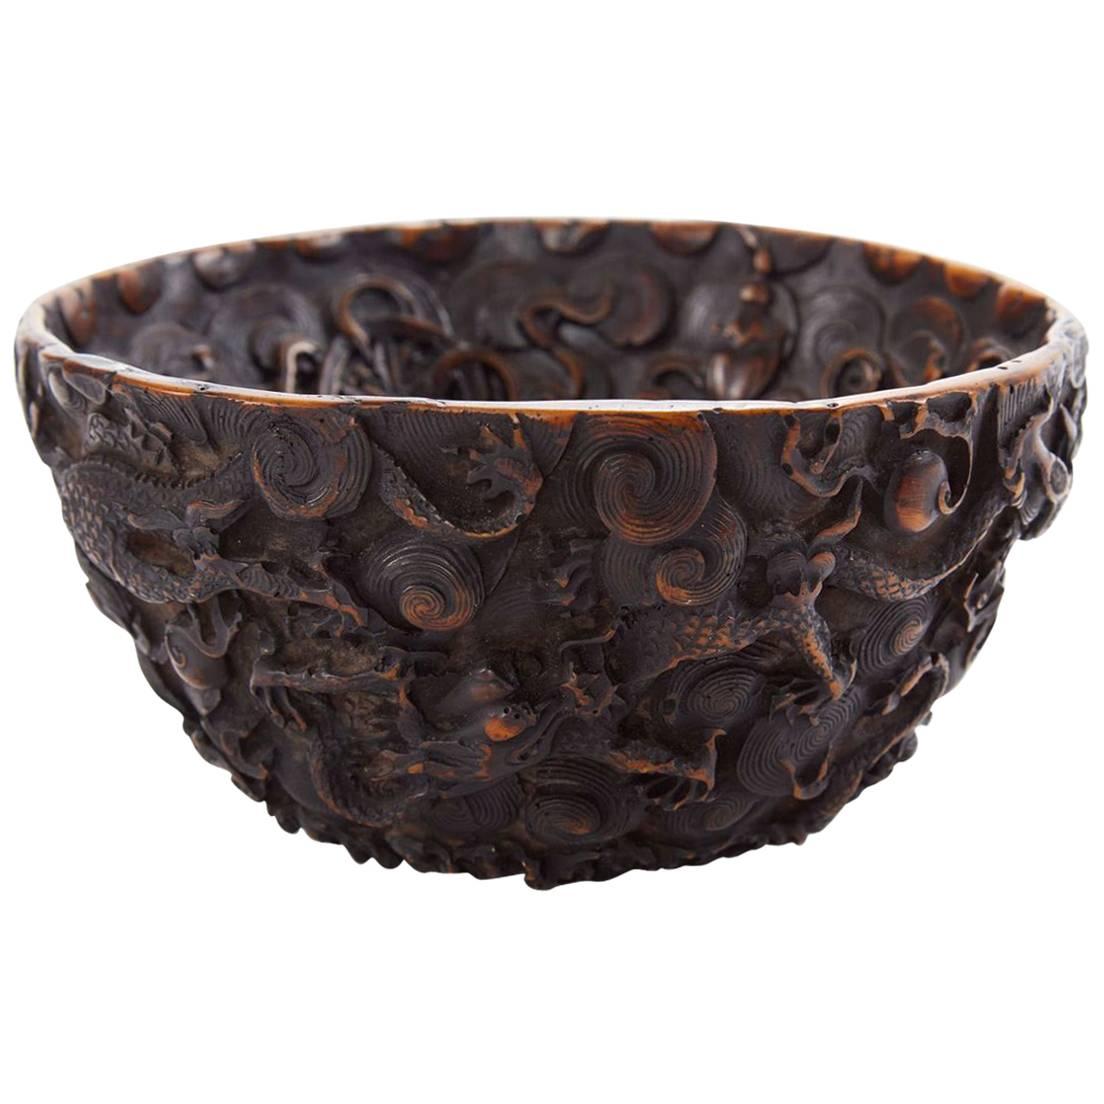 19th Century Black Forest 'German' Carved Bowl